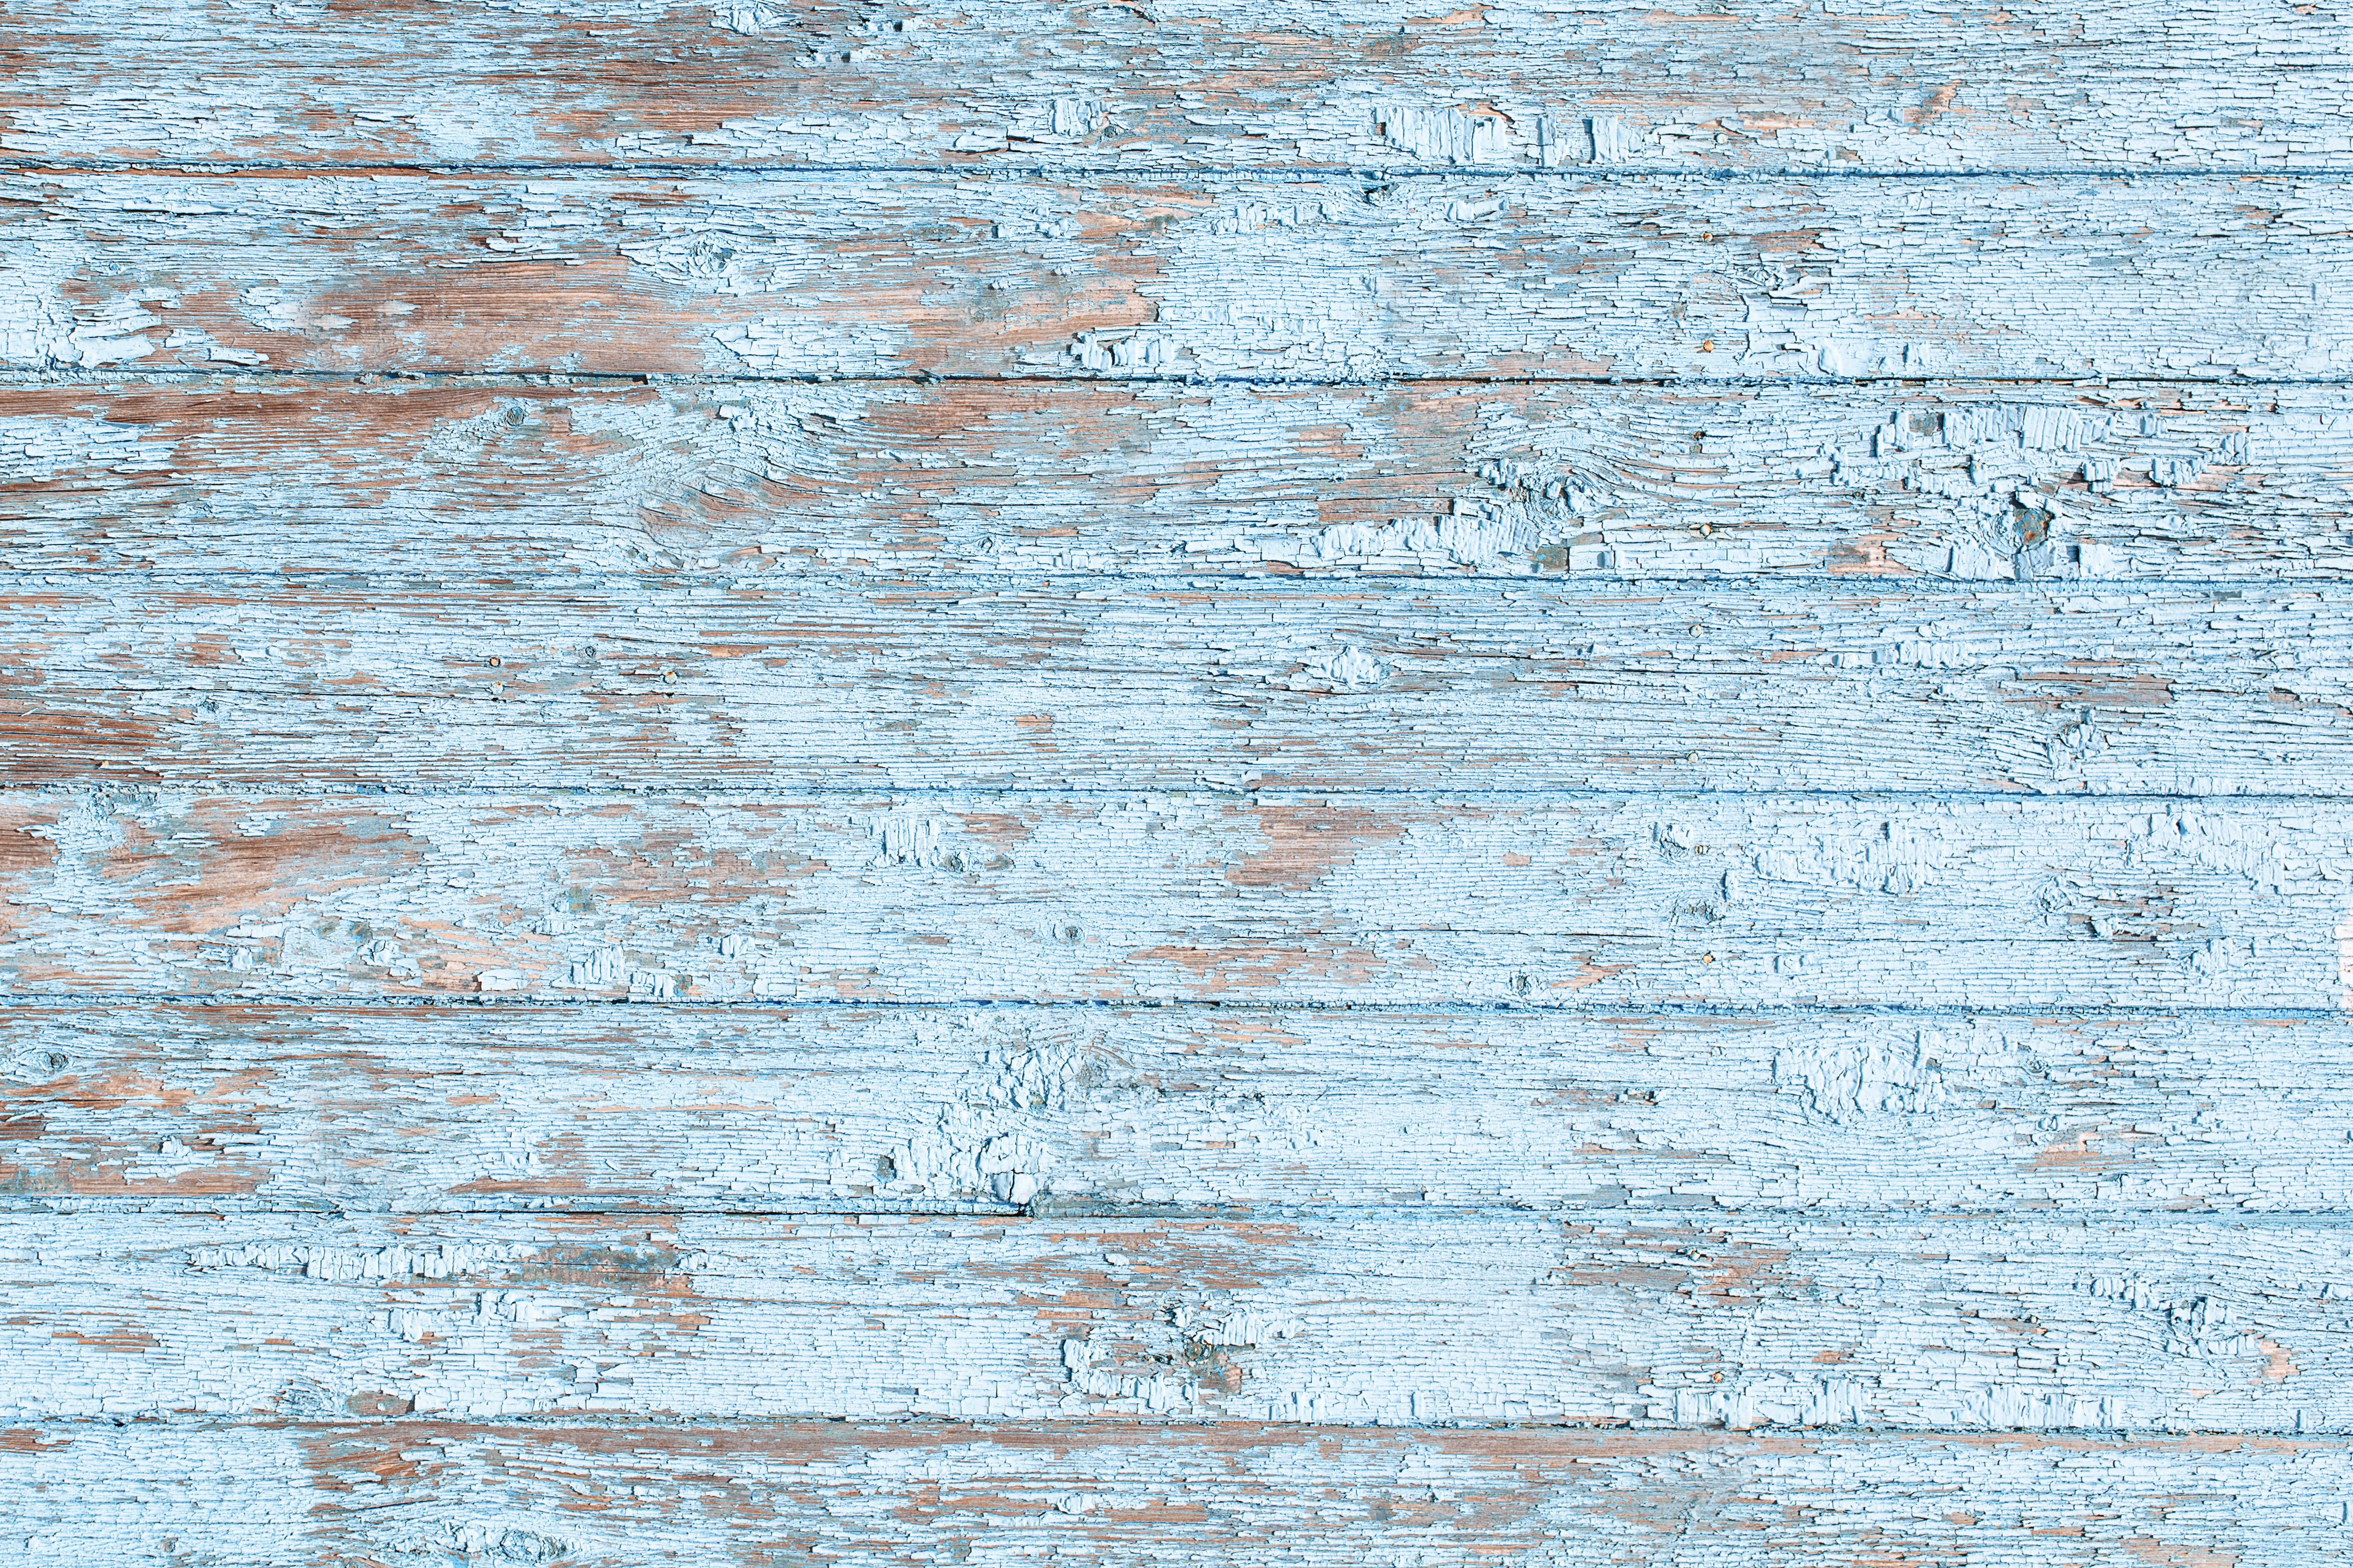 Vintage Shabby Wood Texture Blue Wooden